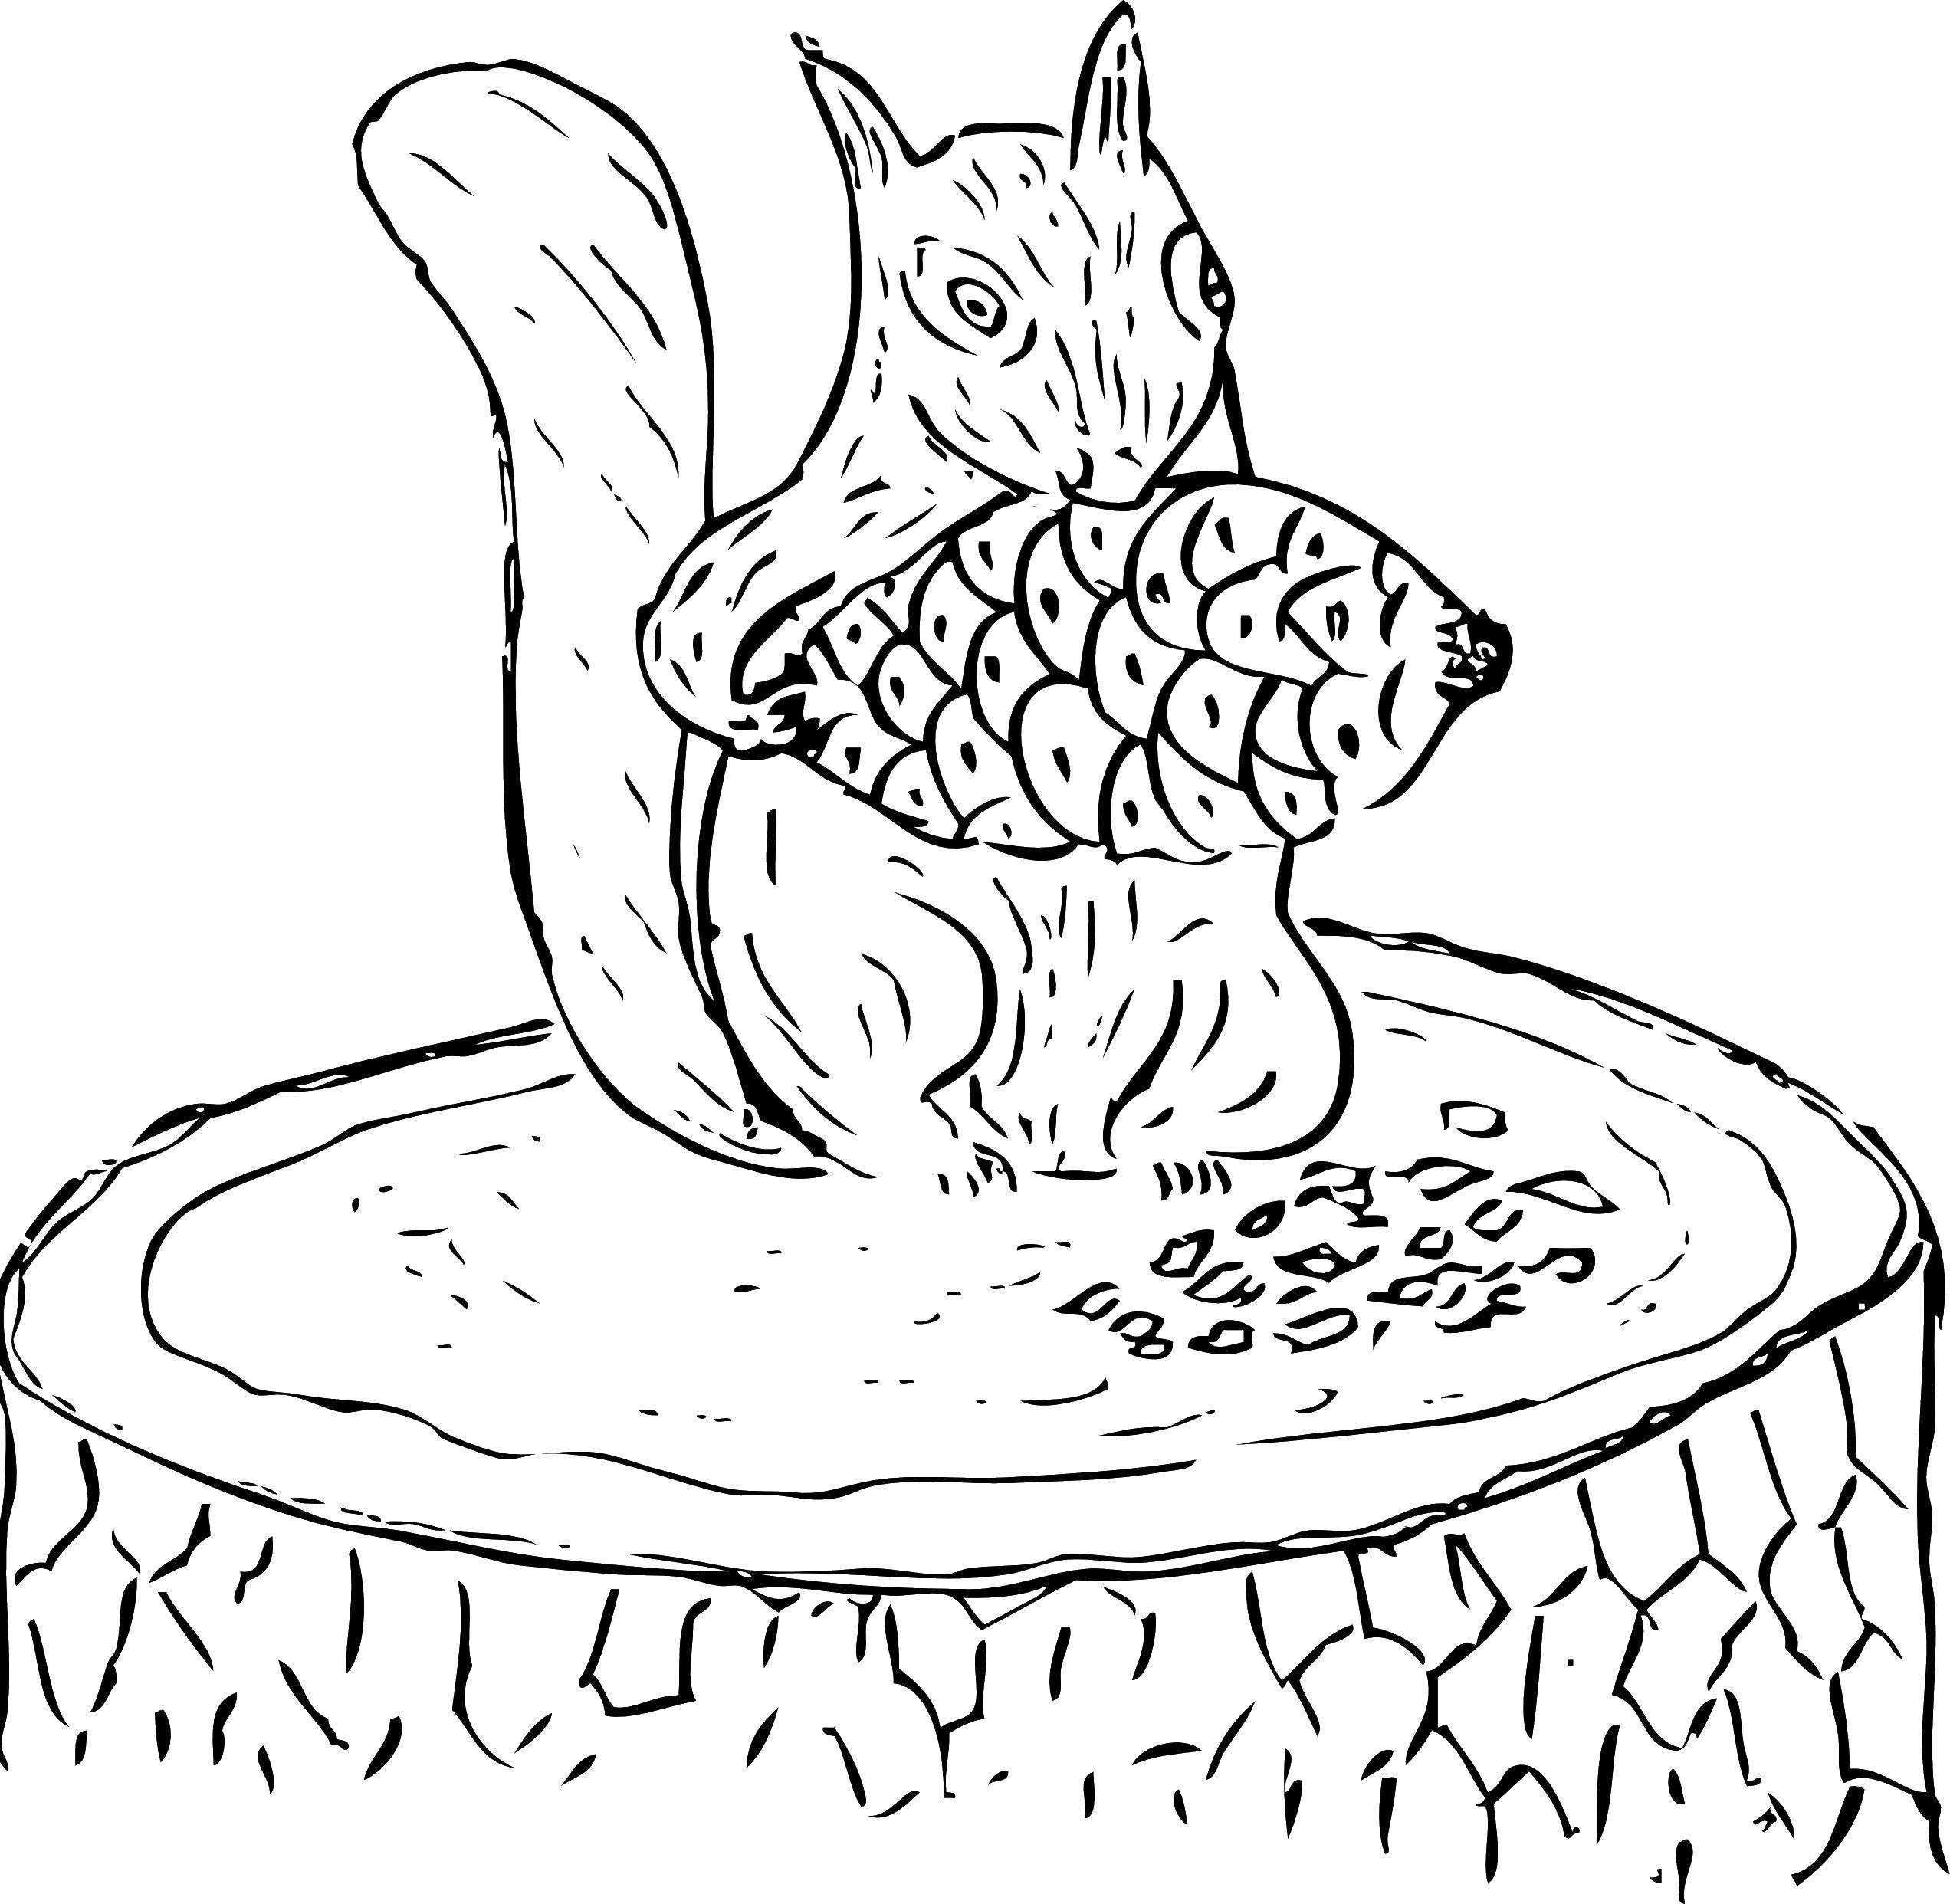 Coloring Squirrel with cone. Category squirrel. Tags:  squirrels, bump, stump.